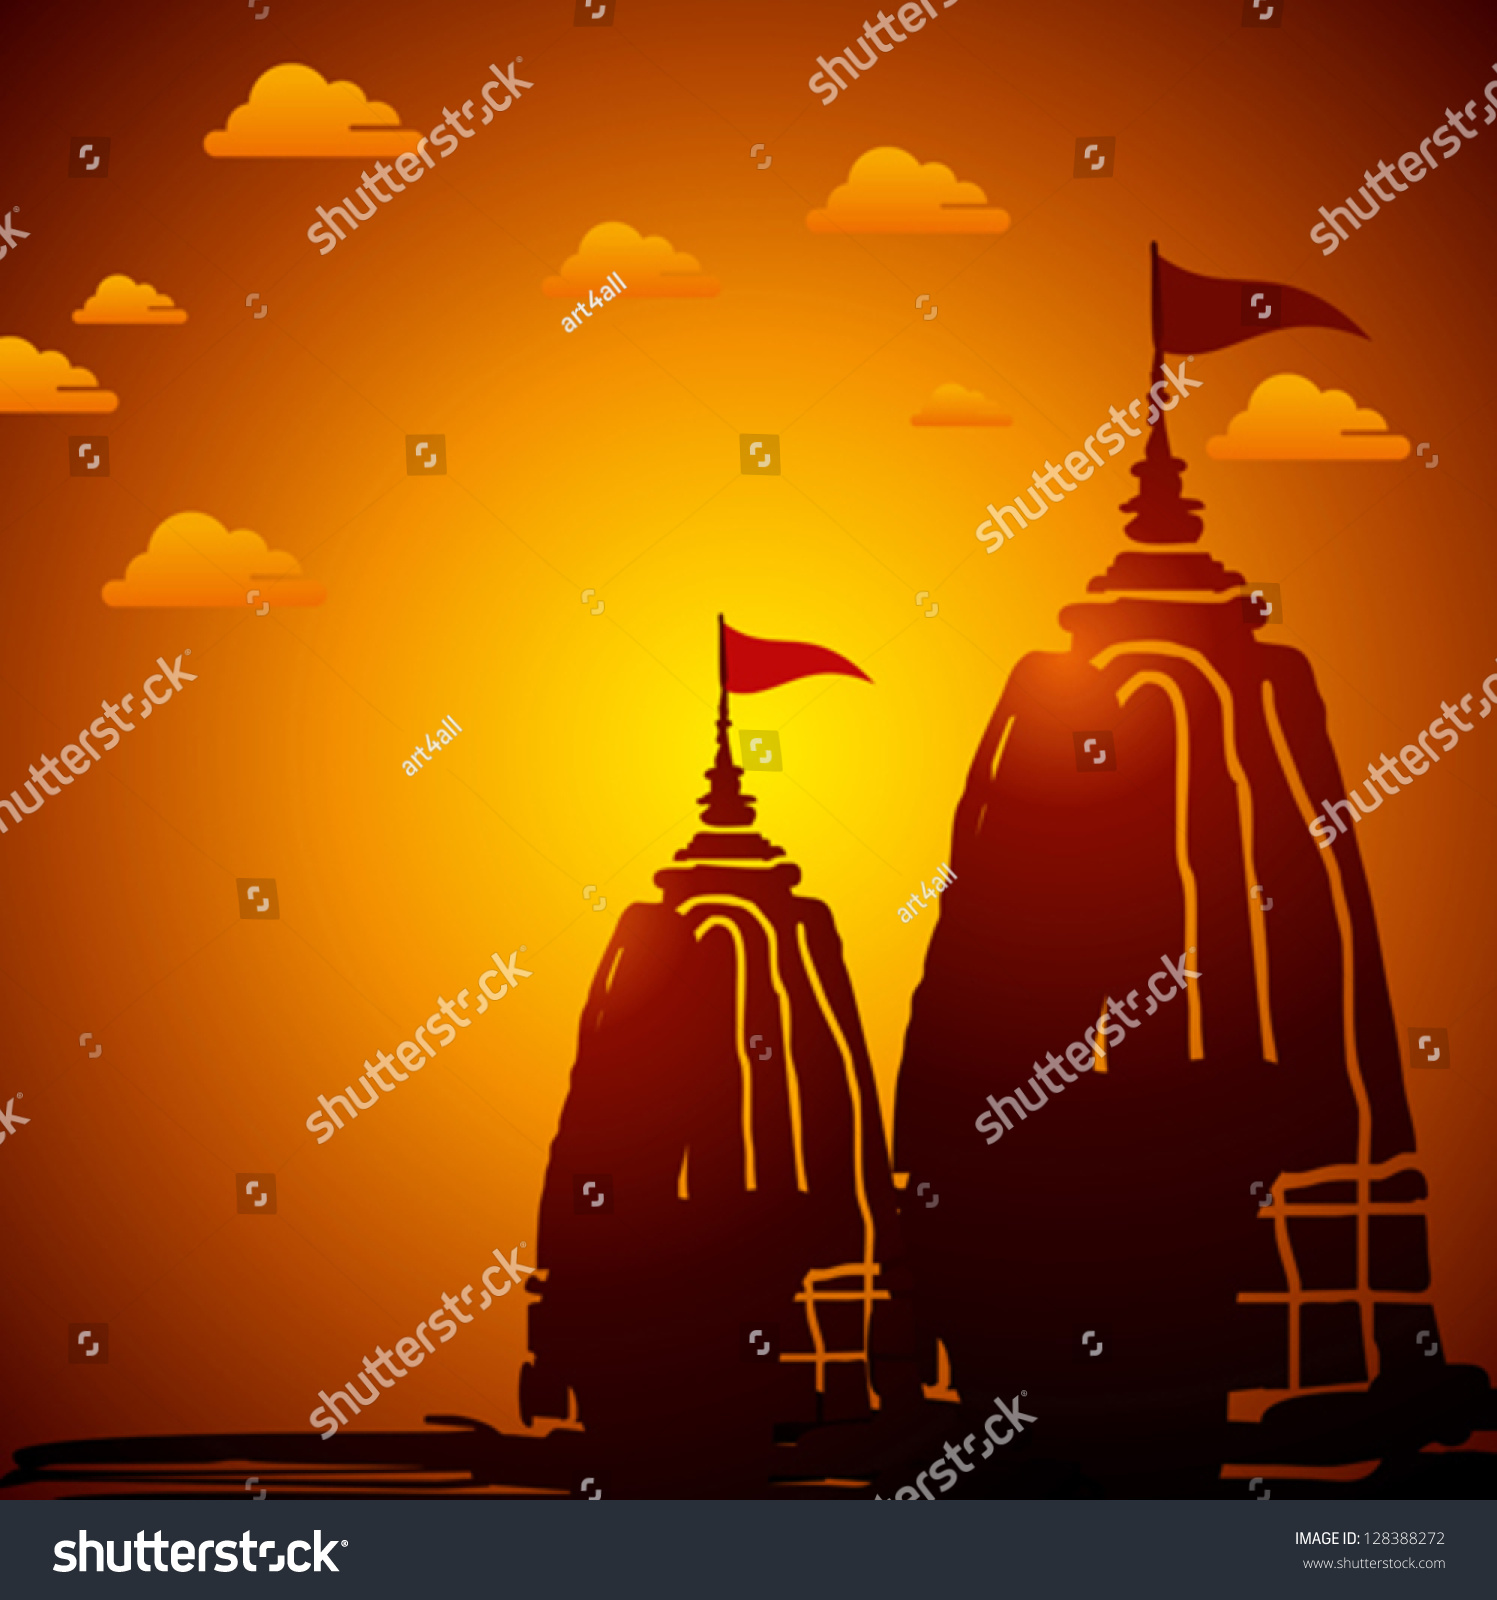 Indian Temple Architecture Sunset Stock Vector (Royalty Free) 128388272 ...